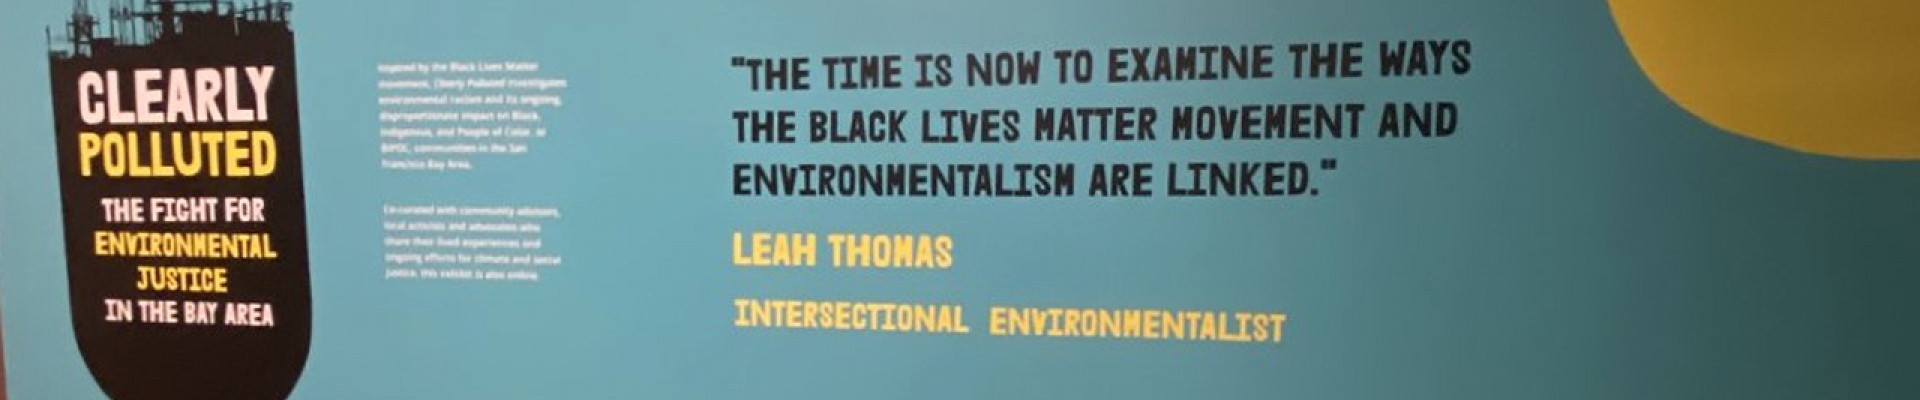 On a blue green wall is an oil barrel with the words Clearly Polluted The Fight for Environmental Justice in the Bay Area, and a quote in chunky black letters that reads the time is now to examine the ways the black lives matter movement and environmentalism are linked by Leah thomas. At the top right of the wall are bright yellow toxic clouds.